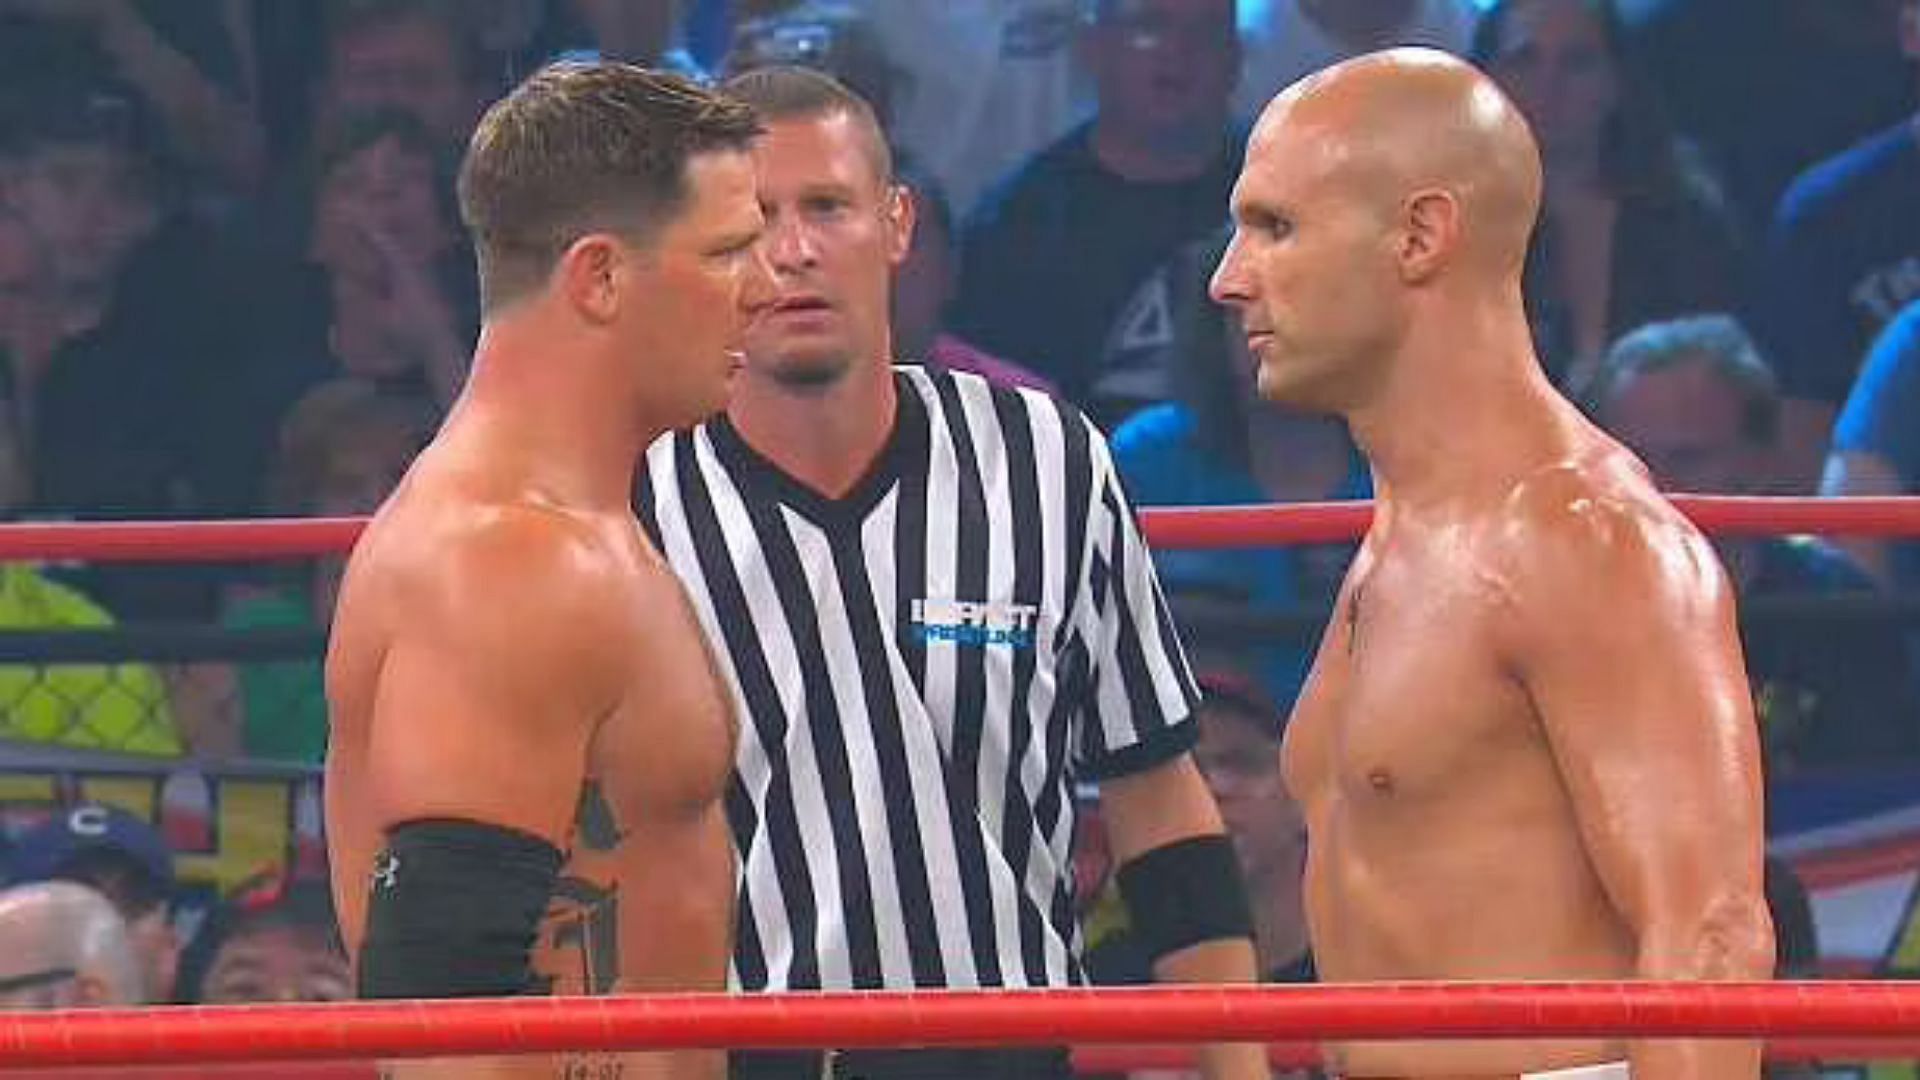 Daniels and AJ Styles facing off during their TNA days (Image Courtesy: TNA)